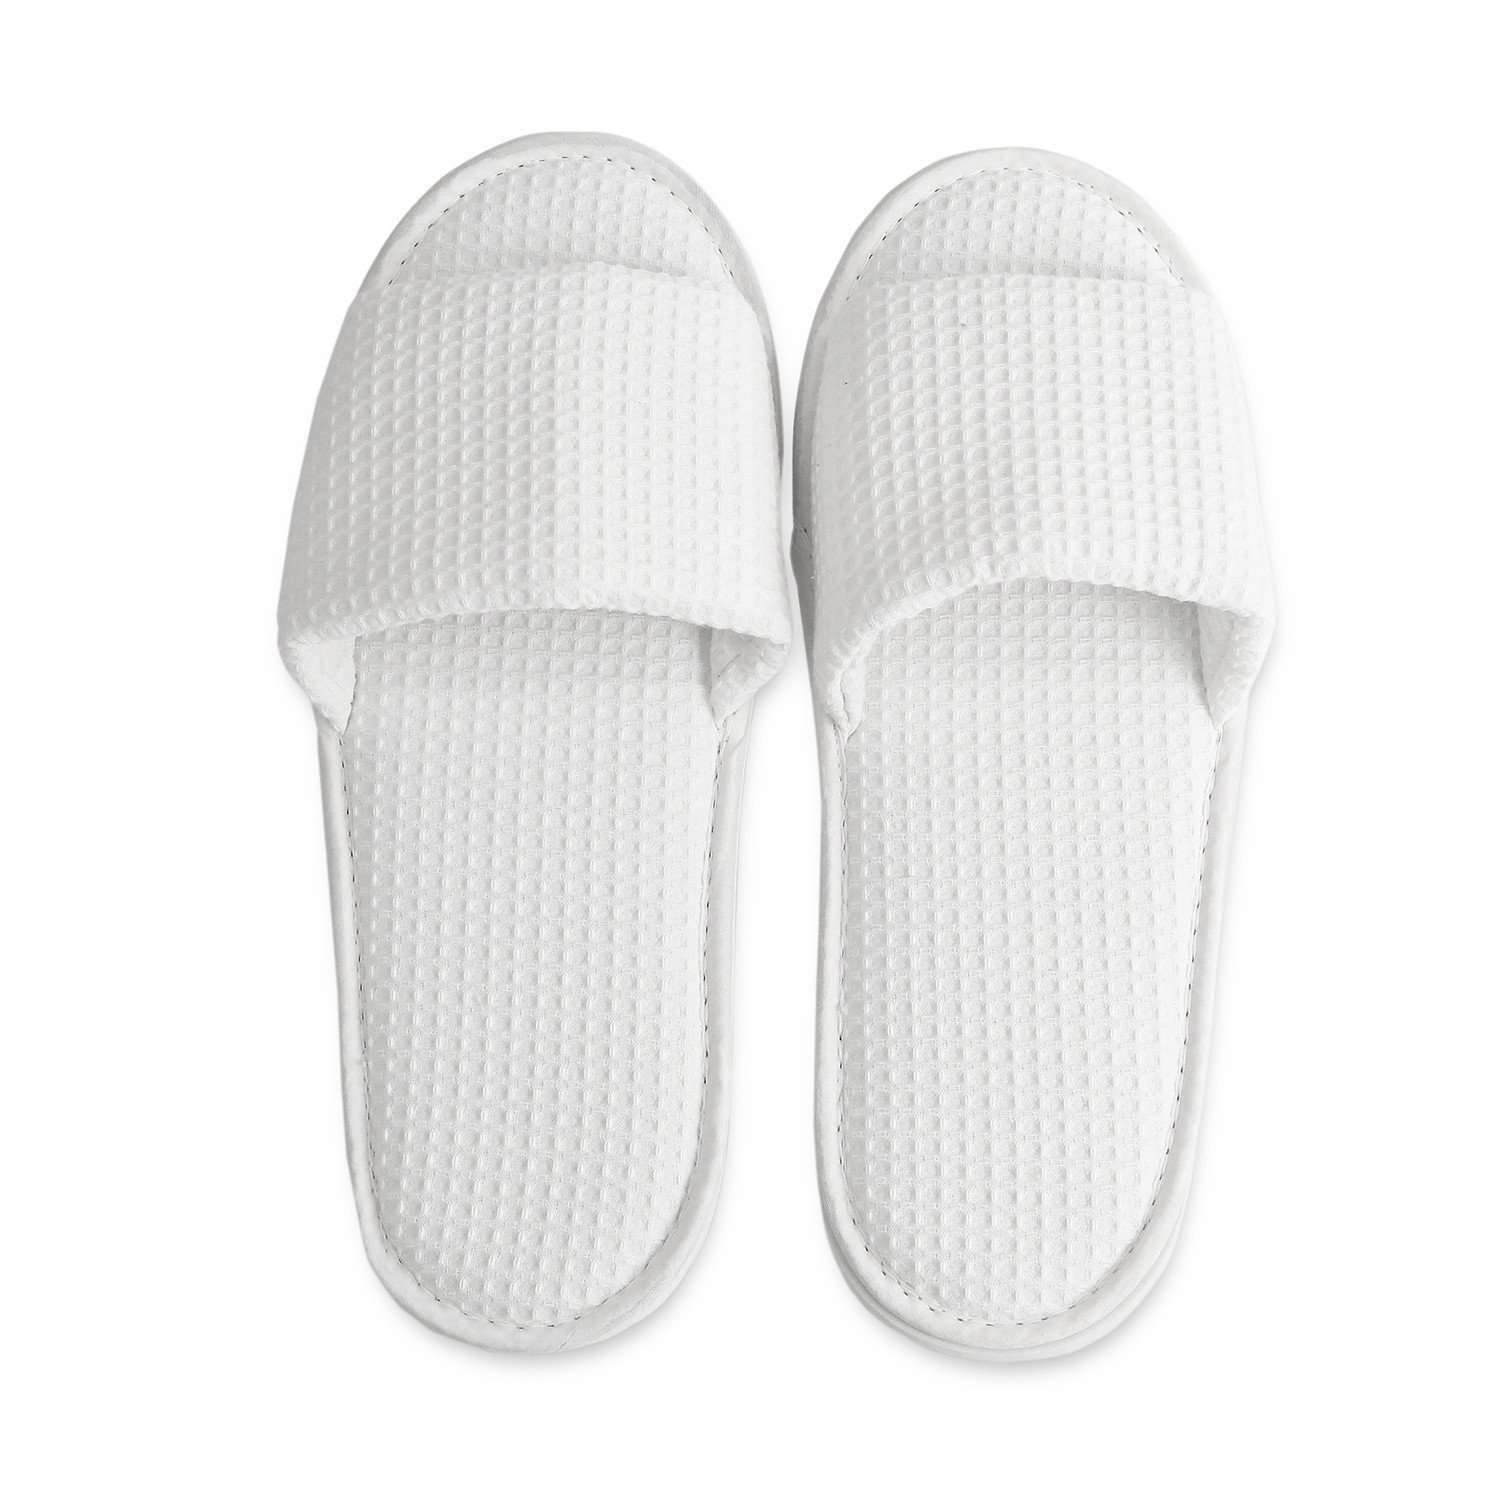 Frontier følgeslutning Syd Lakeview Waffle Spa Slippers | Shop Luxury Bedding and Bath at Luxor Linens